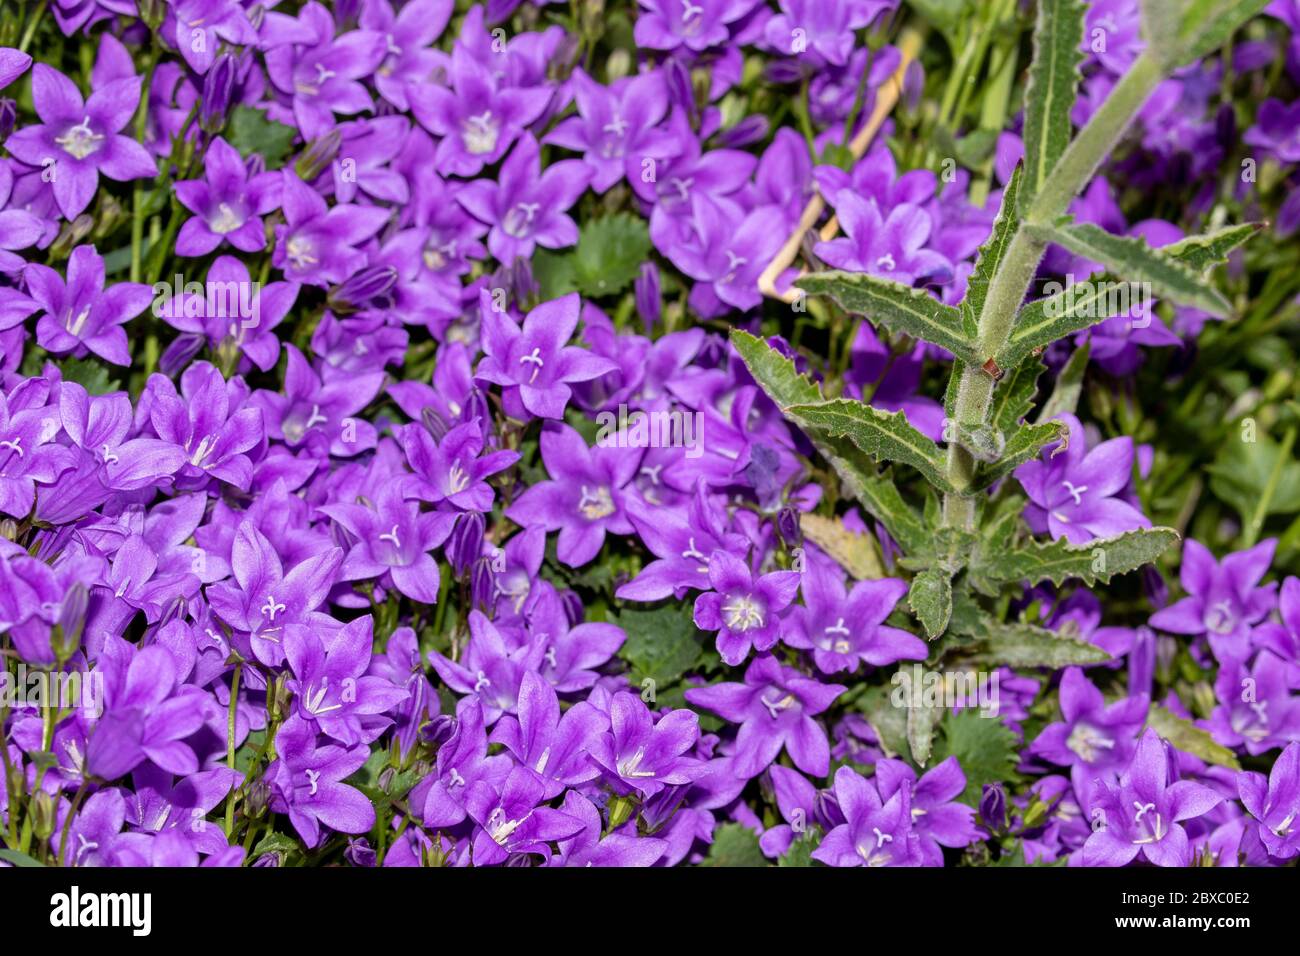 Campanula (bell flower) flowering profusely in the sunshine of an English garden Stock Photo